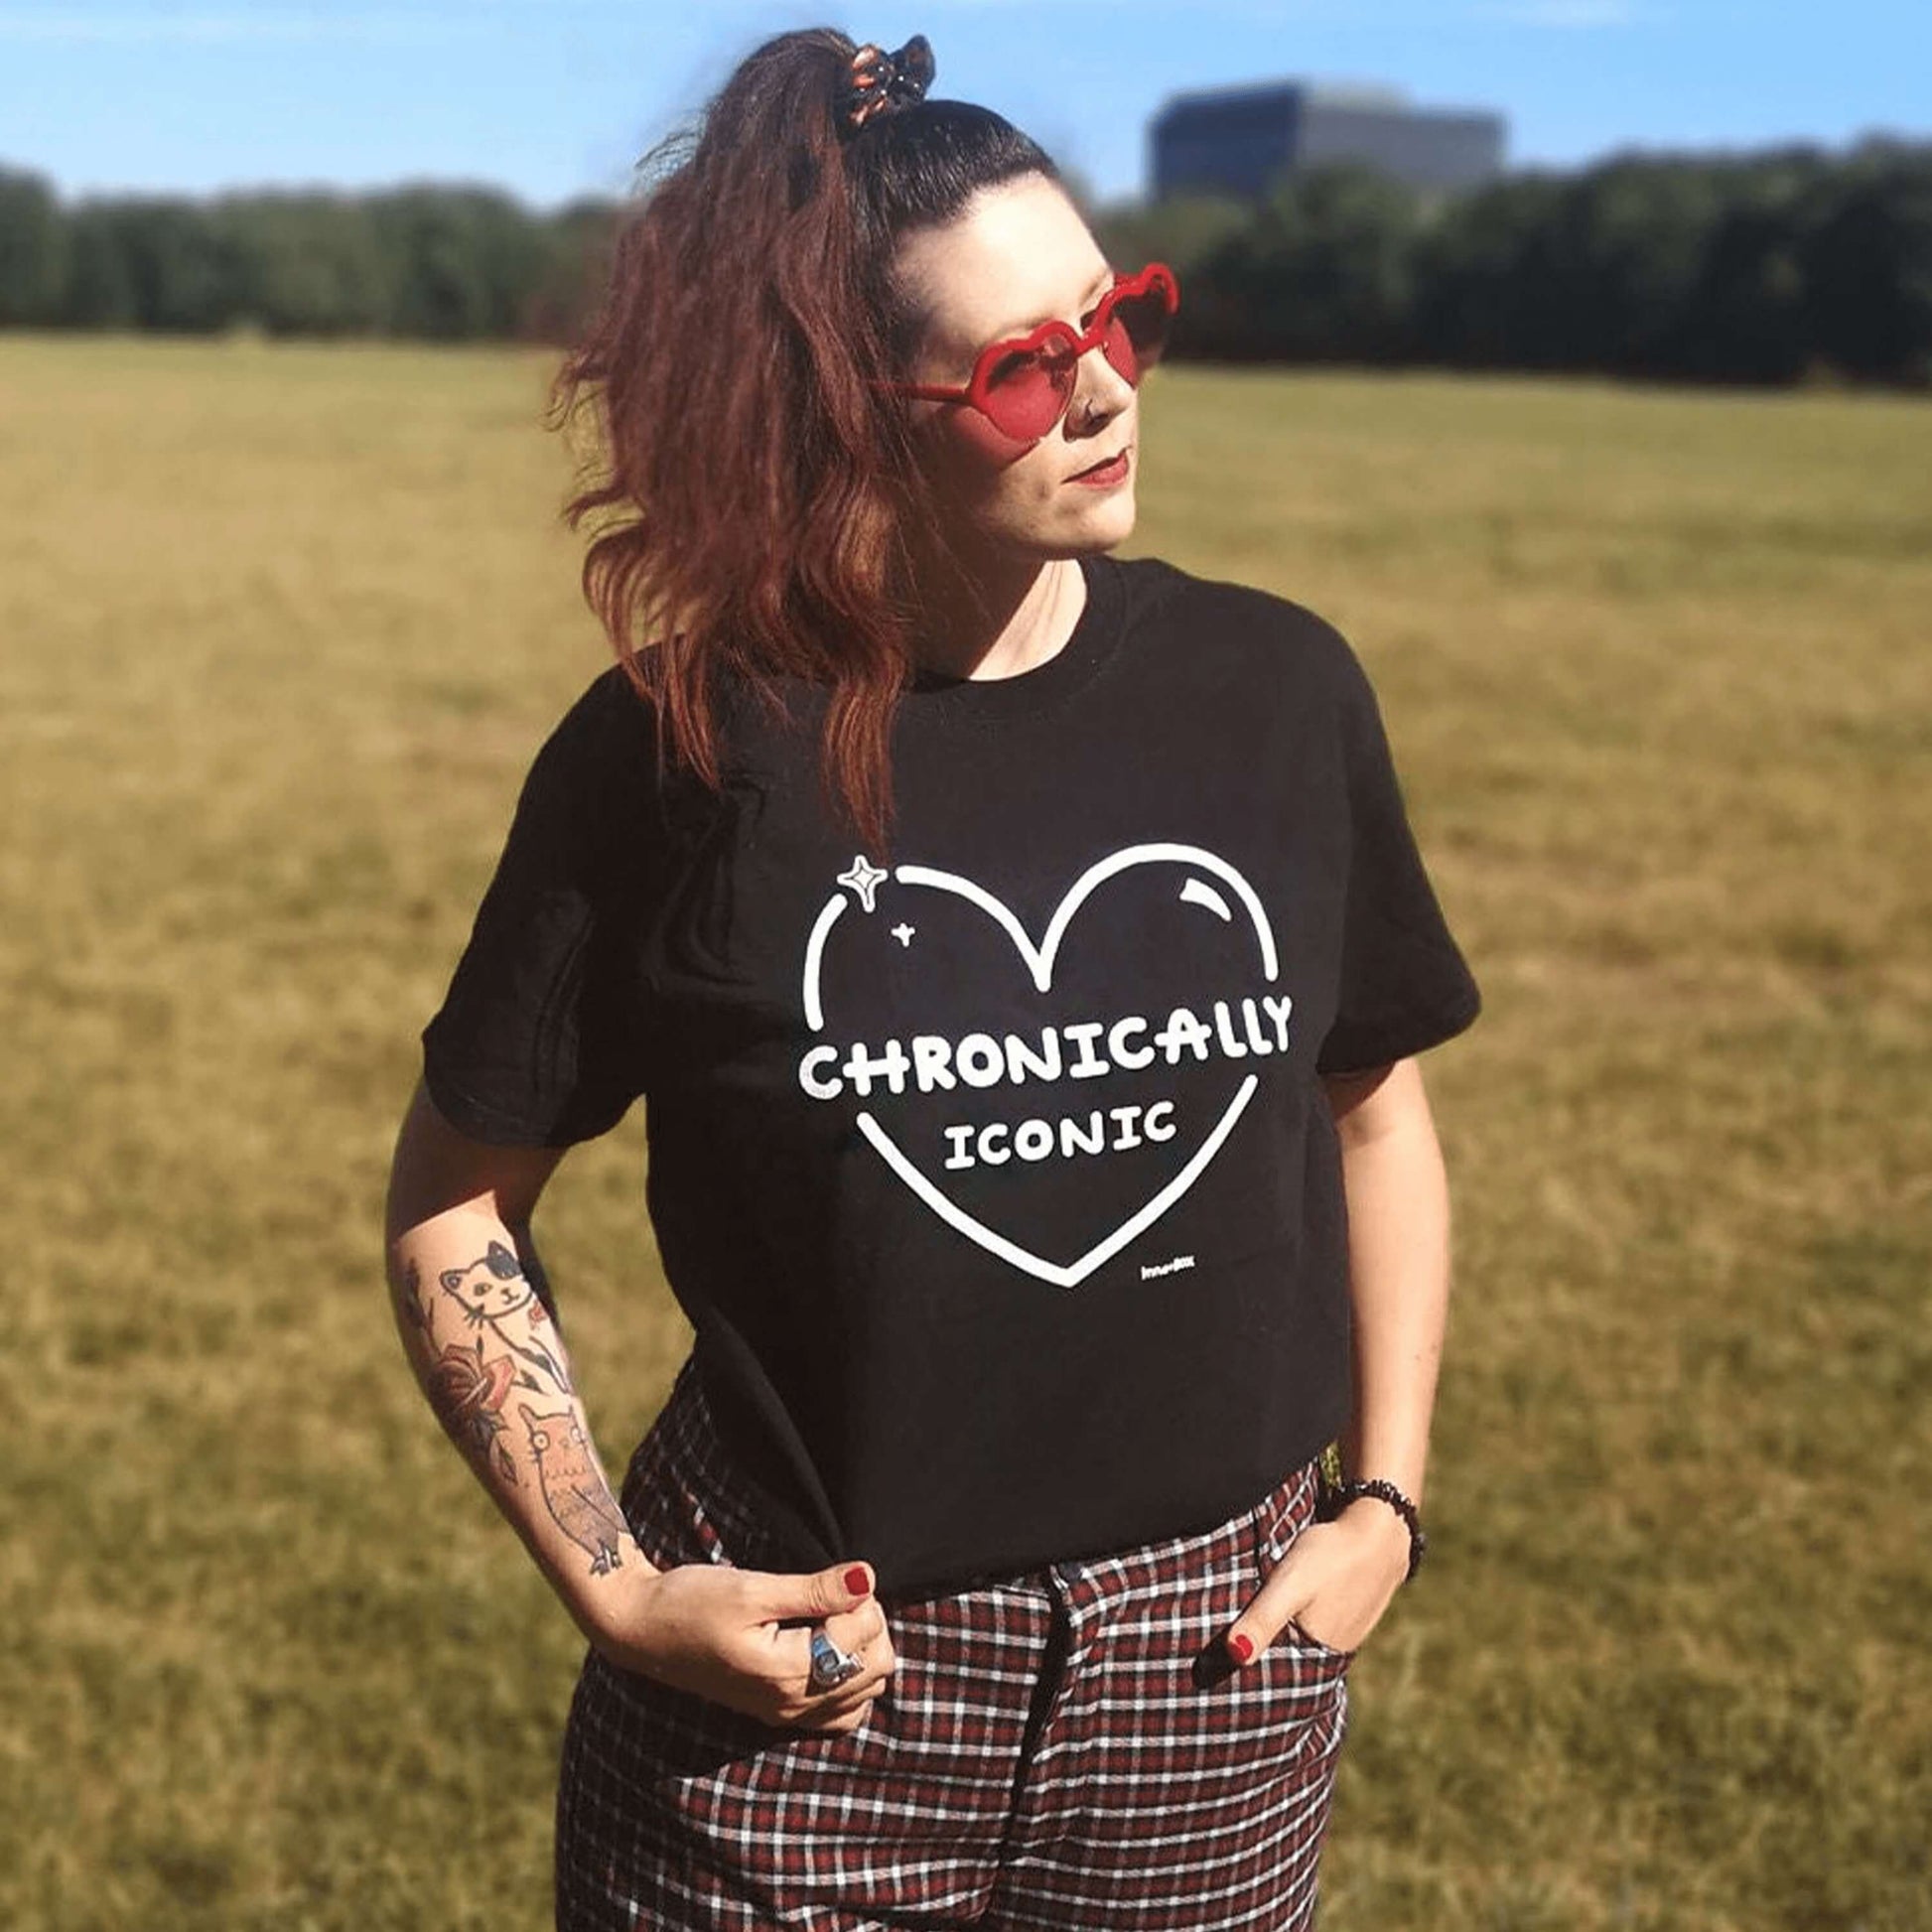 The Chronically Iconic black tee modelled by Nikky, with long brown hair in a ponytail and tattoos. She is facing forward looking off to the right pulling on the tucked in tshirt, she is wearing a black scrunchie, red heart sunglasses and red tartan high waist trousers. The short sleeve t-shirt features a white heart outline with sparkles and centre text reading 'chronically iconic' with the innabox logo underneath. The design is raising awareness for chronic illness and invisible illness.